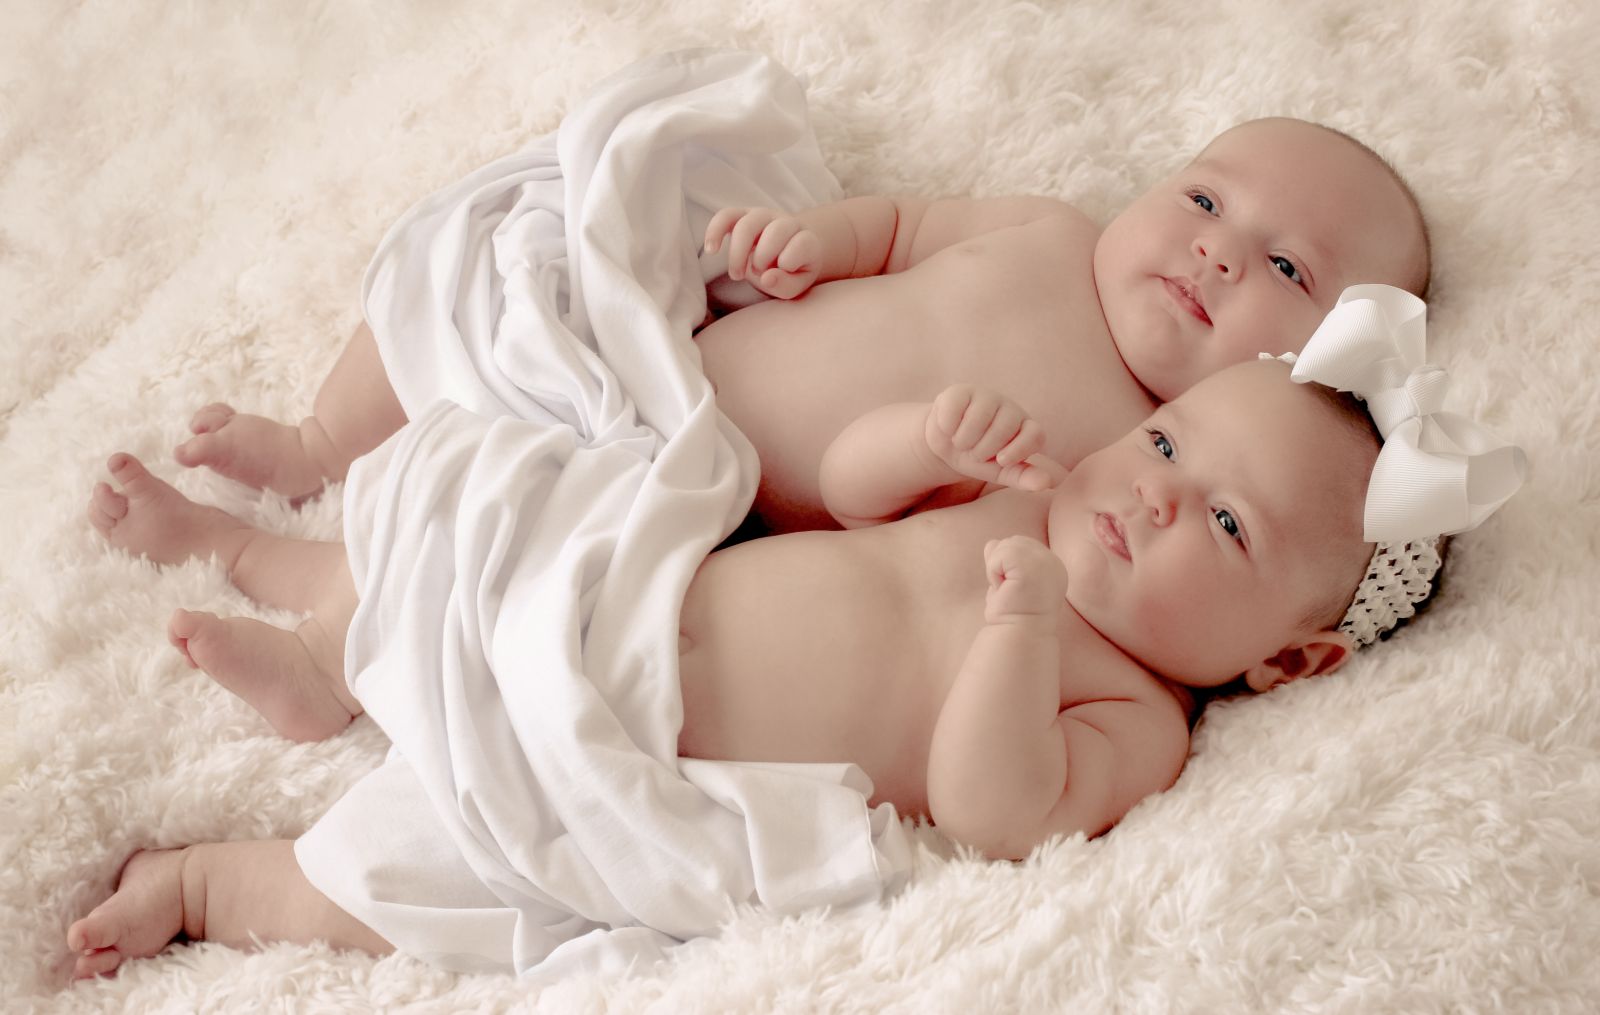 10. Mother's body changes uniquely while having twins